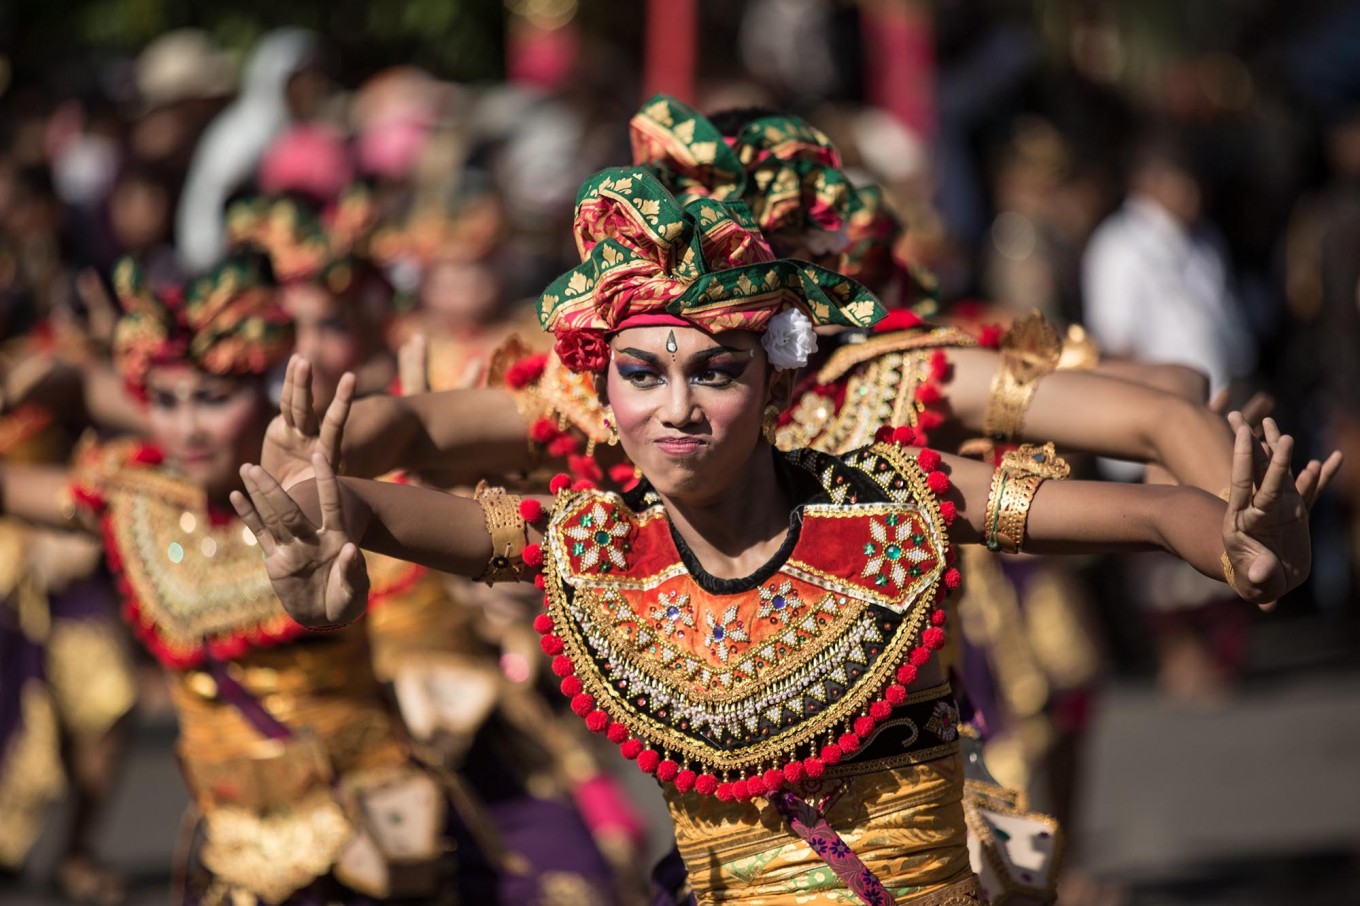 Balinese artists perform during the opening of the 39th Bali Art Festival at the Bajra Sandhi Monument in Denpasar. Image: JP/Agung Parameswara